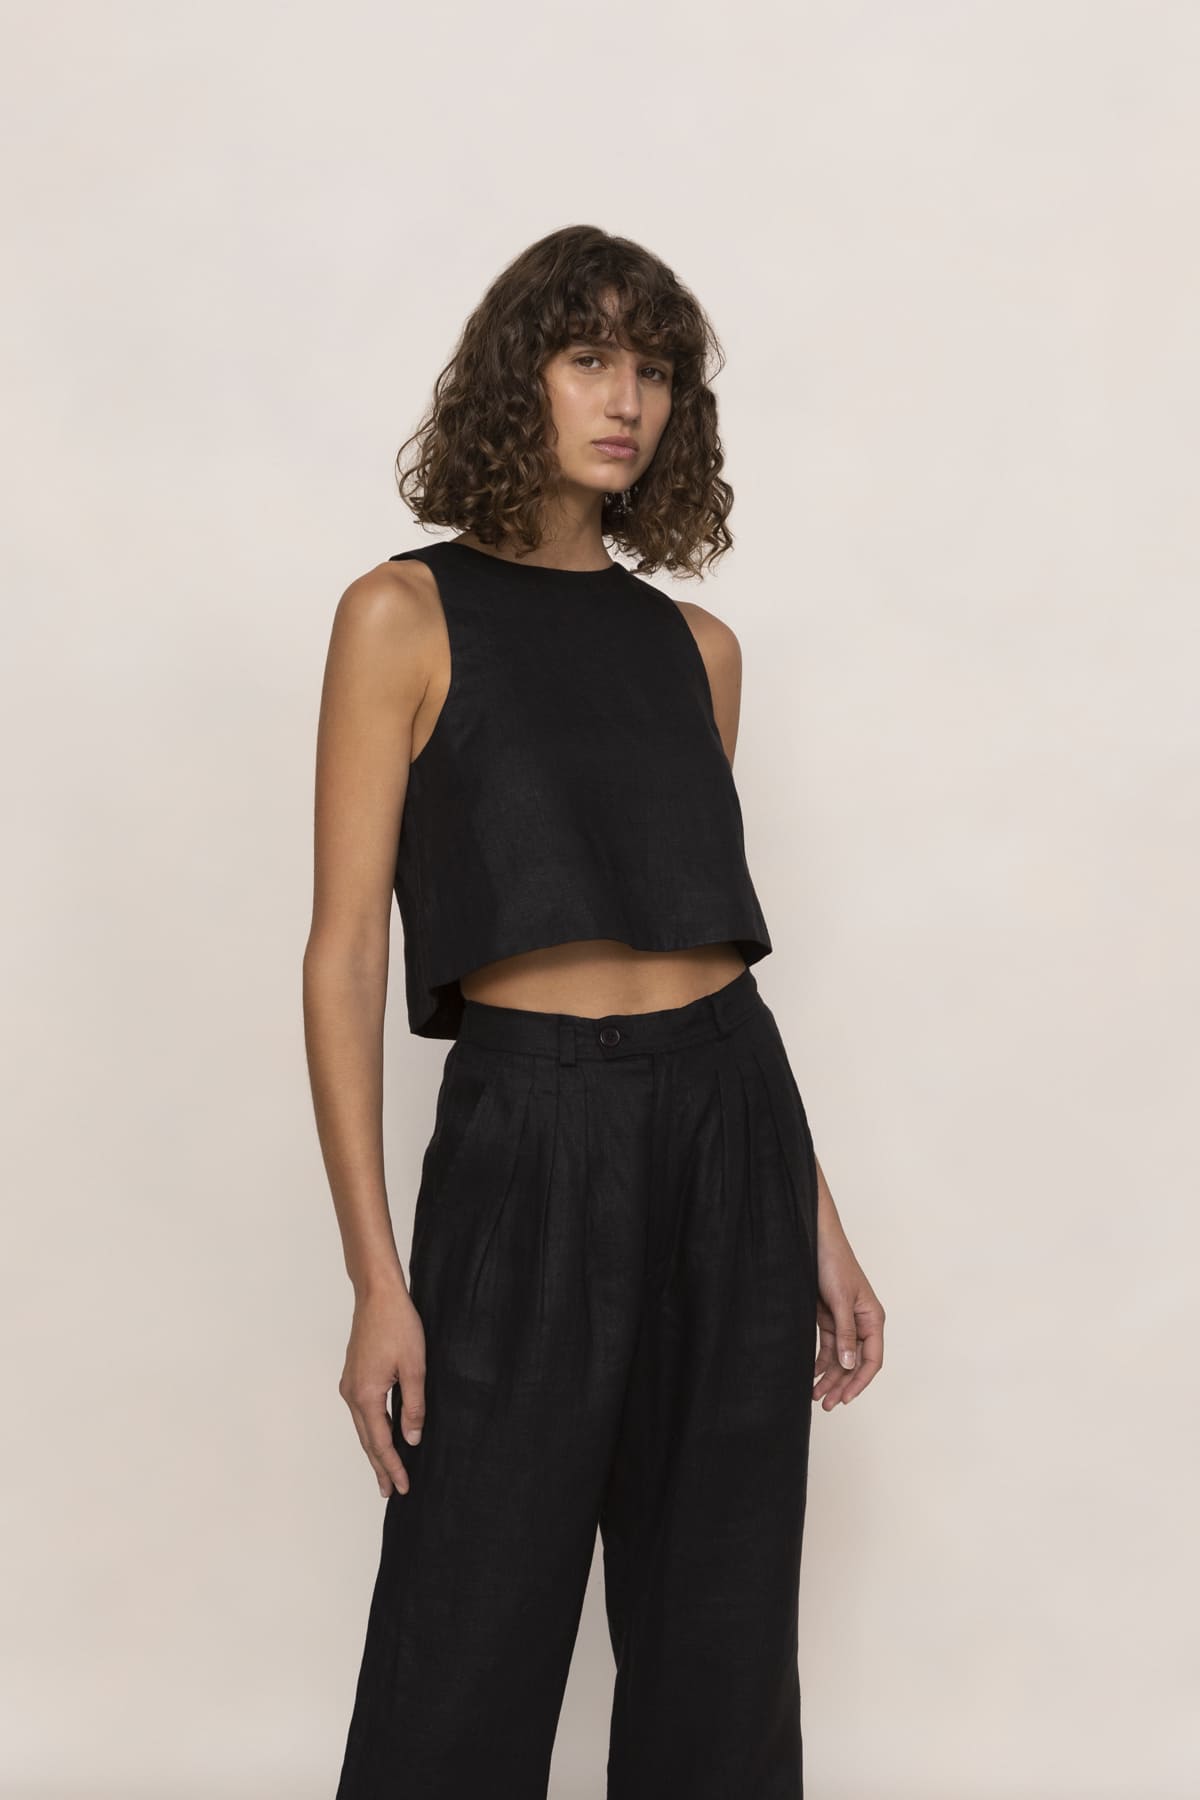 Posse Poppy Top in Black available at The New Trend Australia.